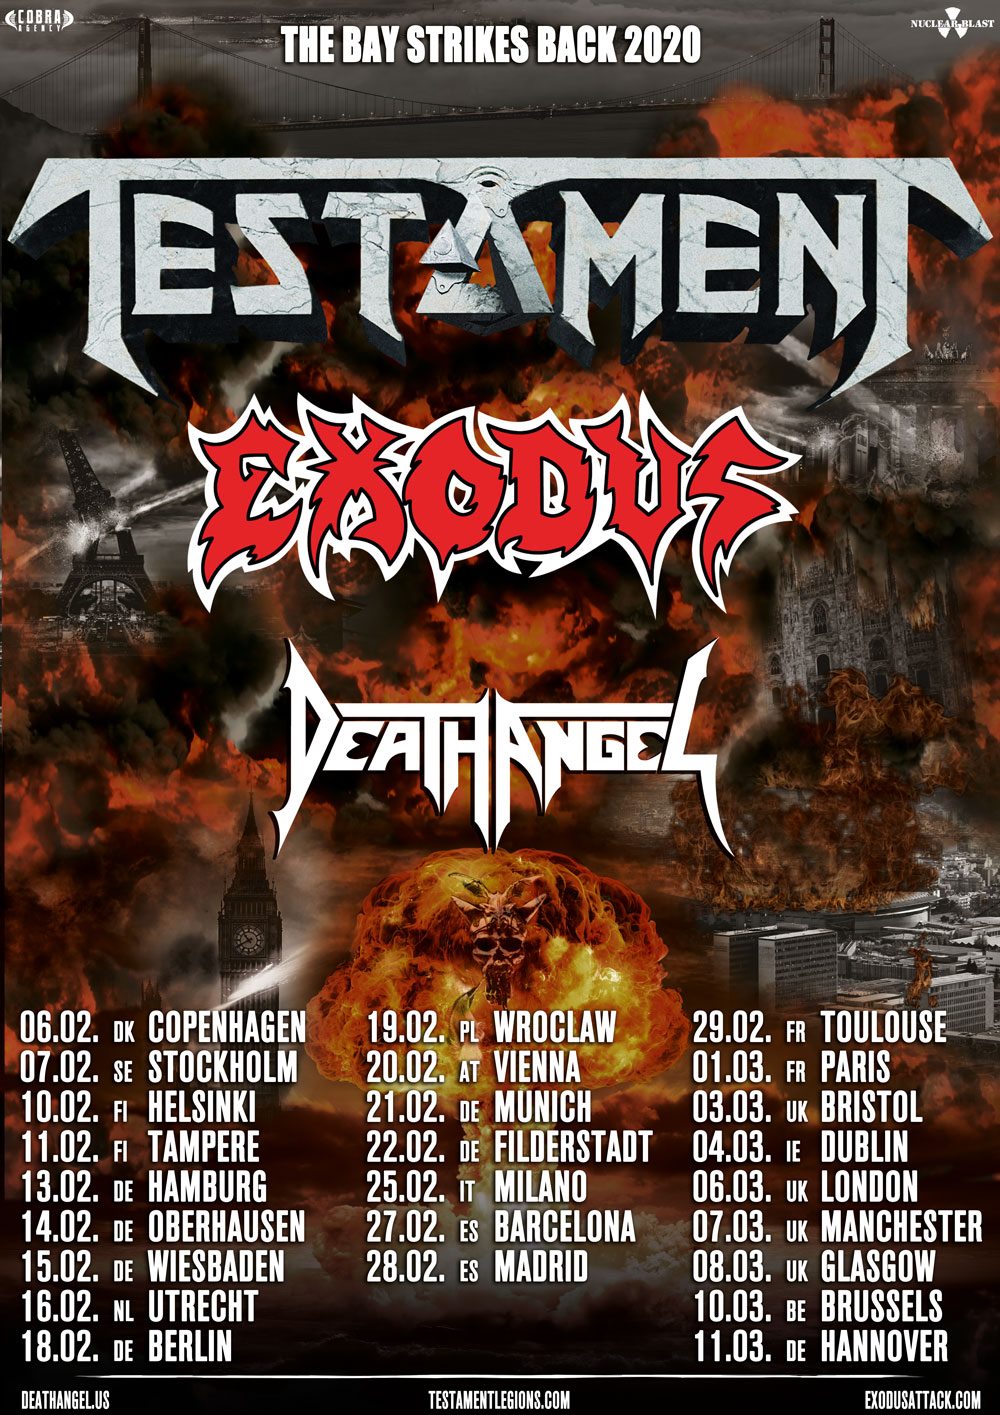 TESTAMENT, EXODUS, And DEATH ANGEL's The Bay Strikes Back Tour 